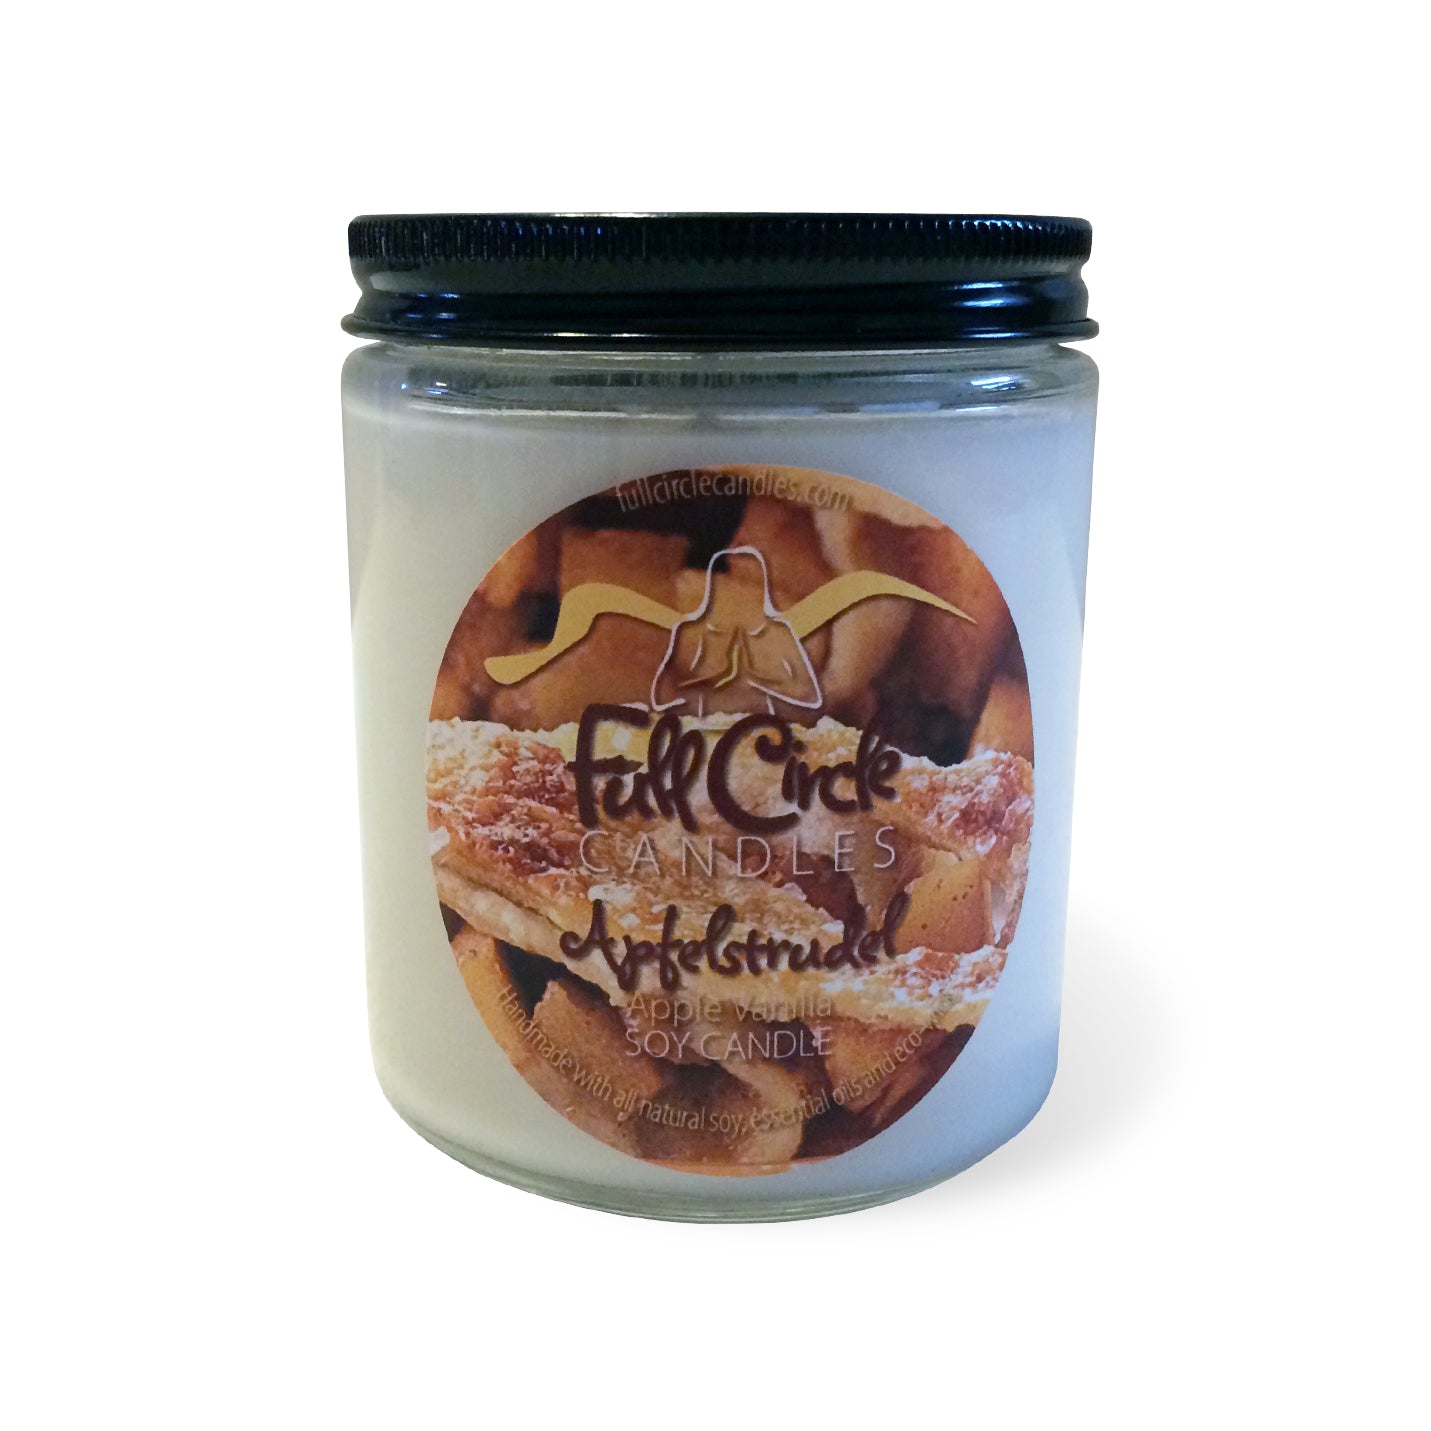 Apple Strudel Soy Candle